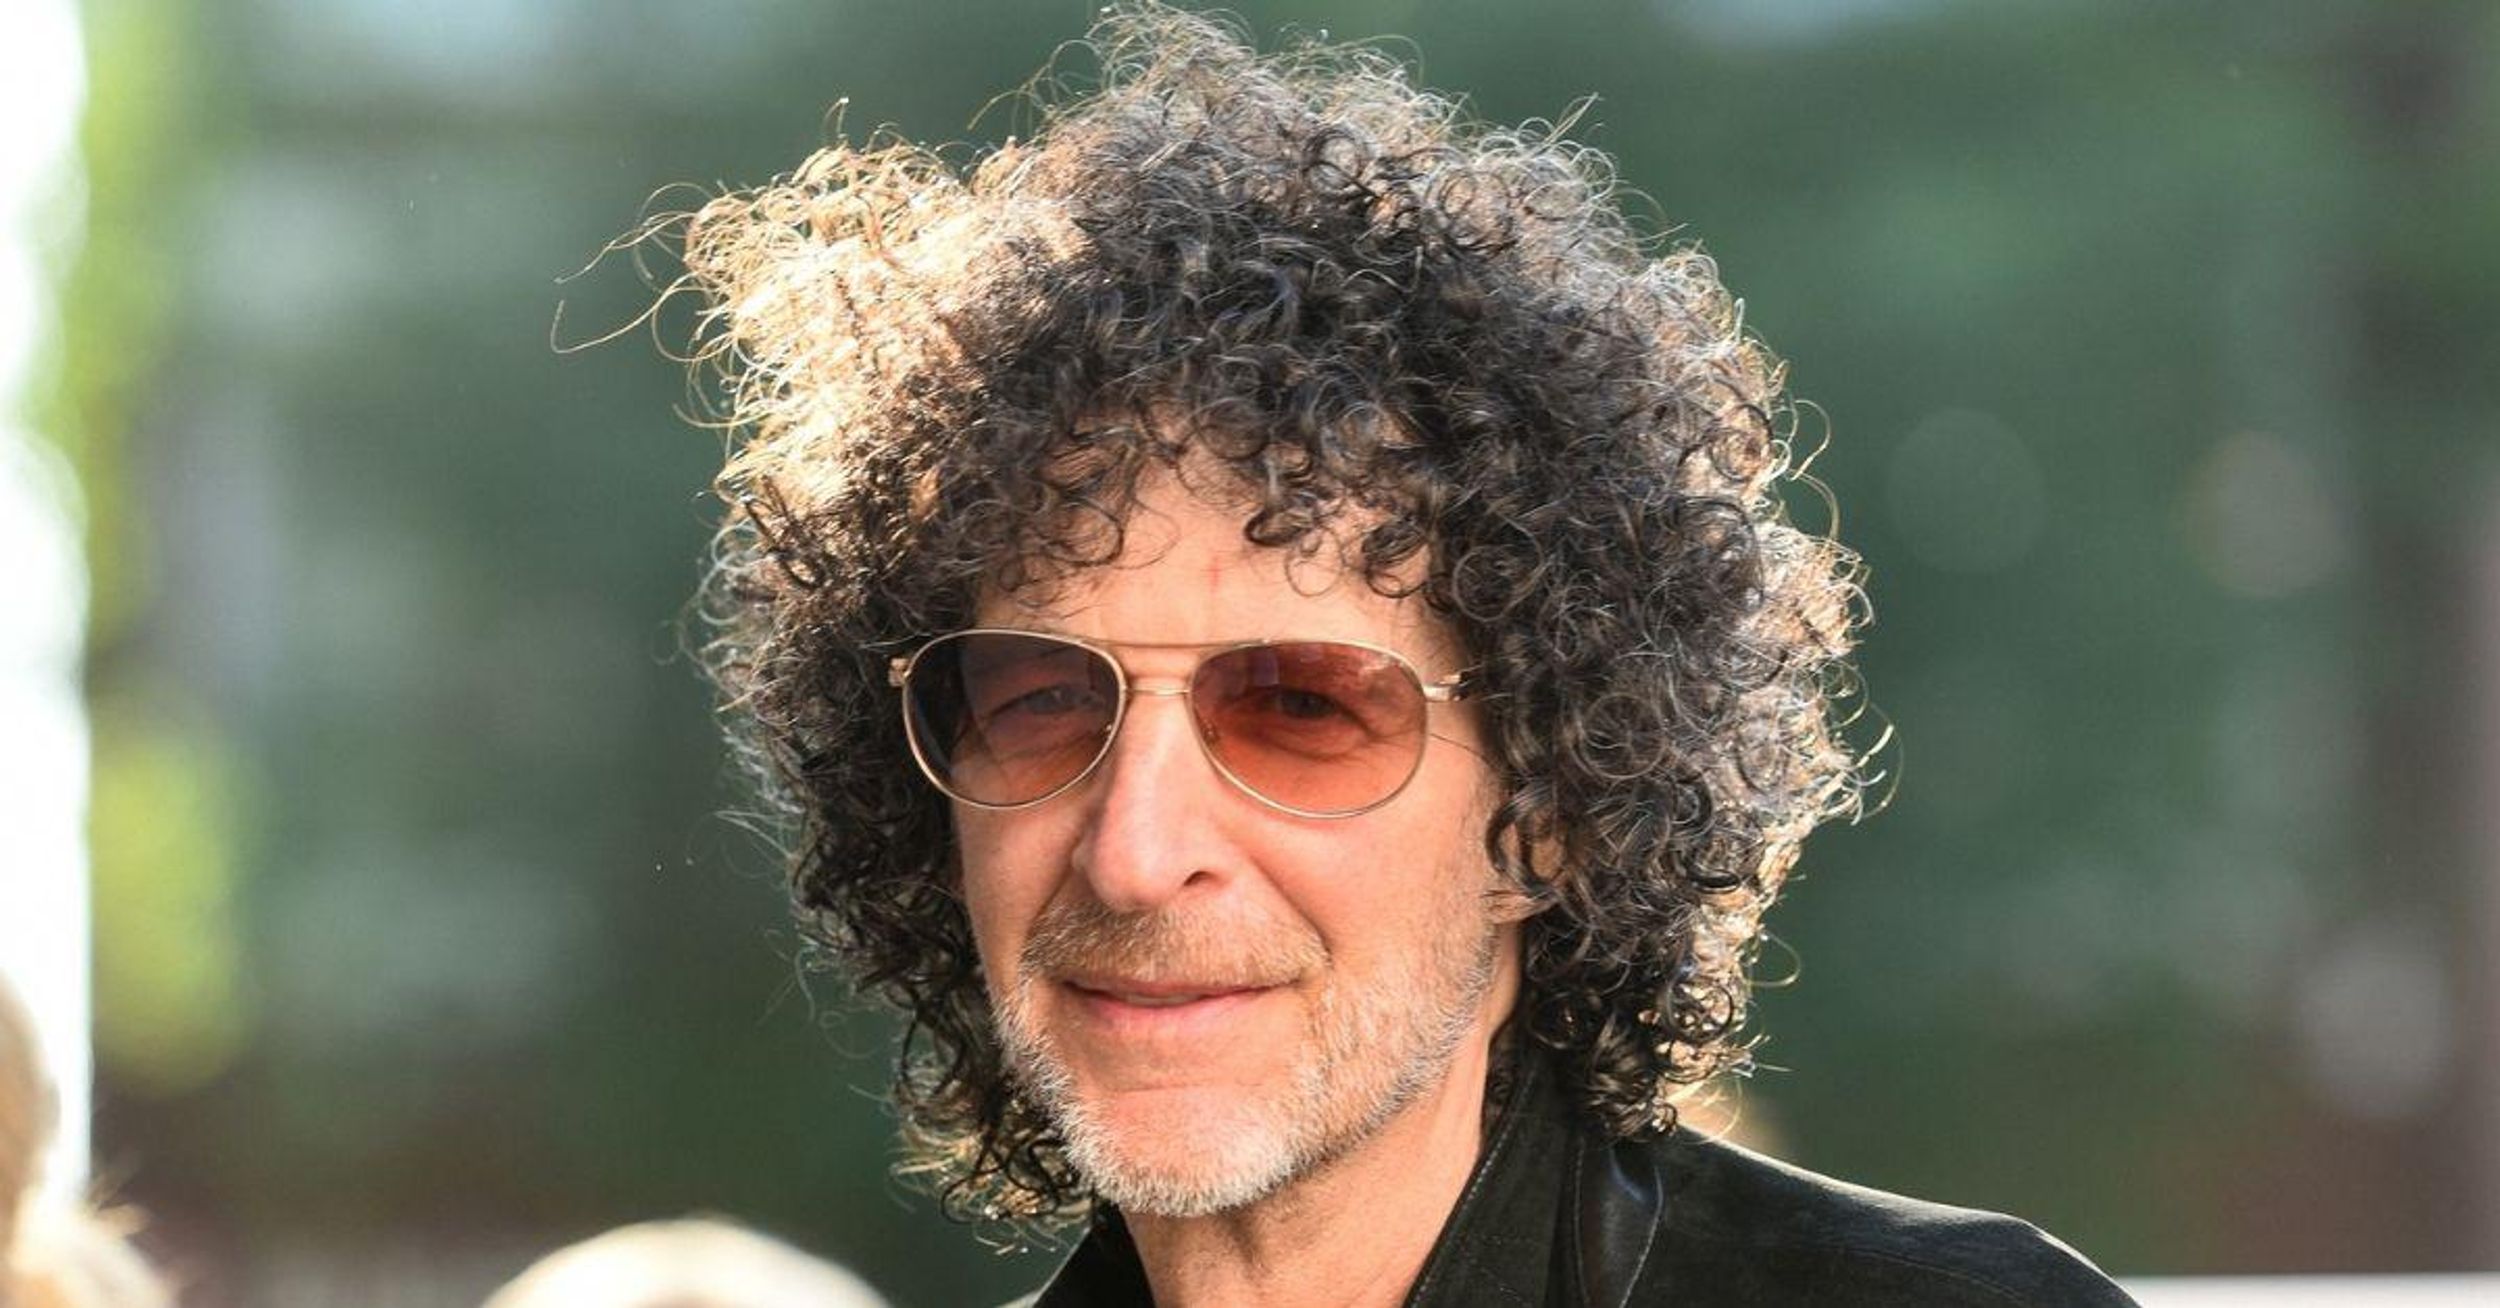 Howard Stern Says Hospitals Should Deny Unvaccinated People In Epic Rant: 'Go Home And Die'